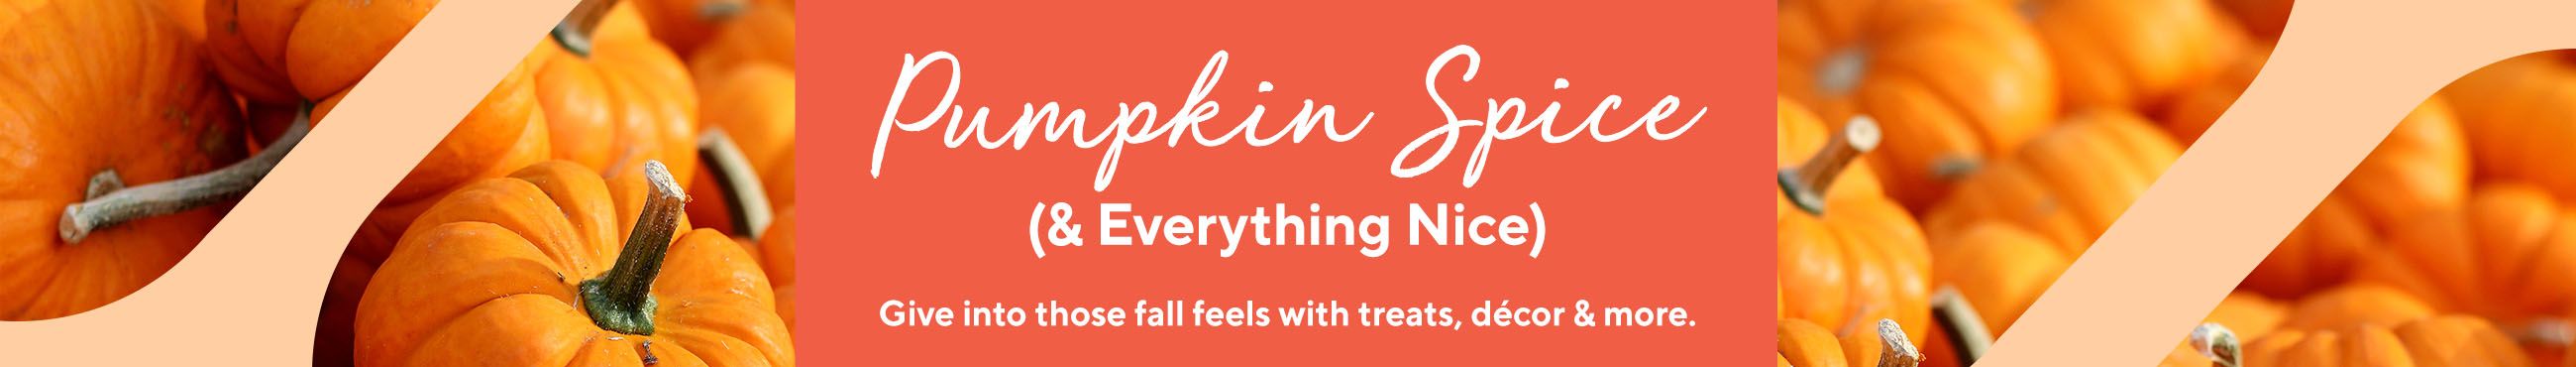 Pumpkin Spice (& Everything Nice).  Give into those fall feels with treats, décor & more.